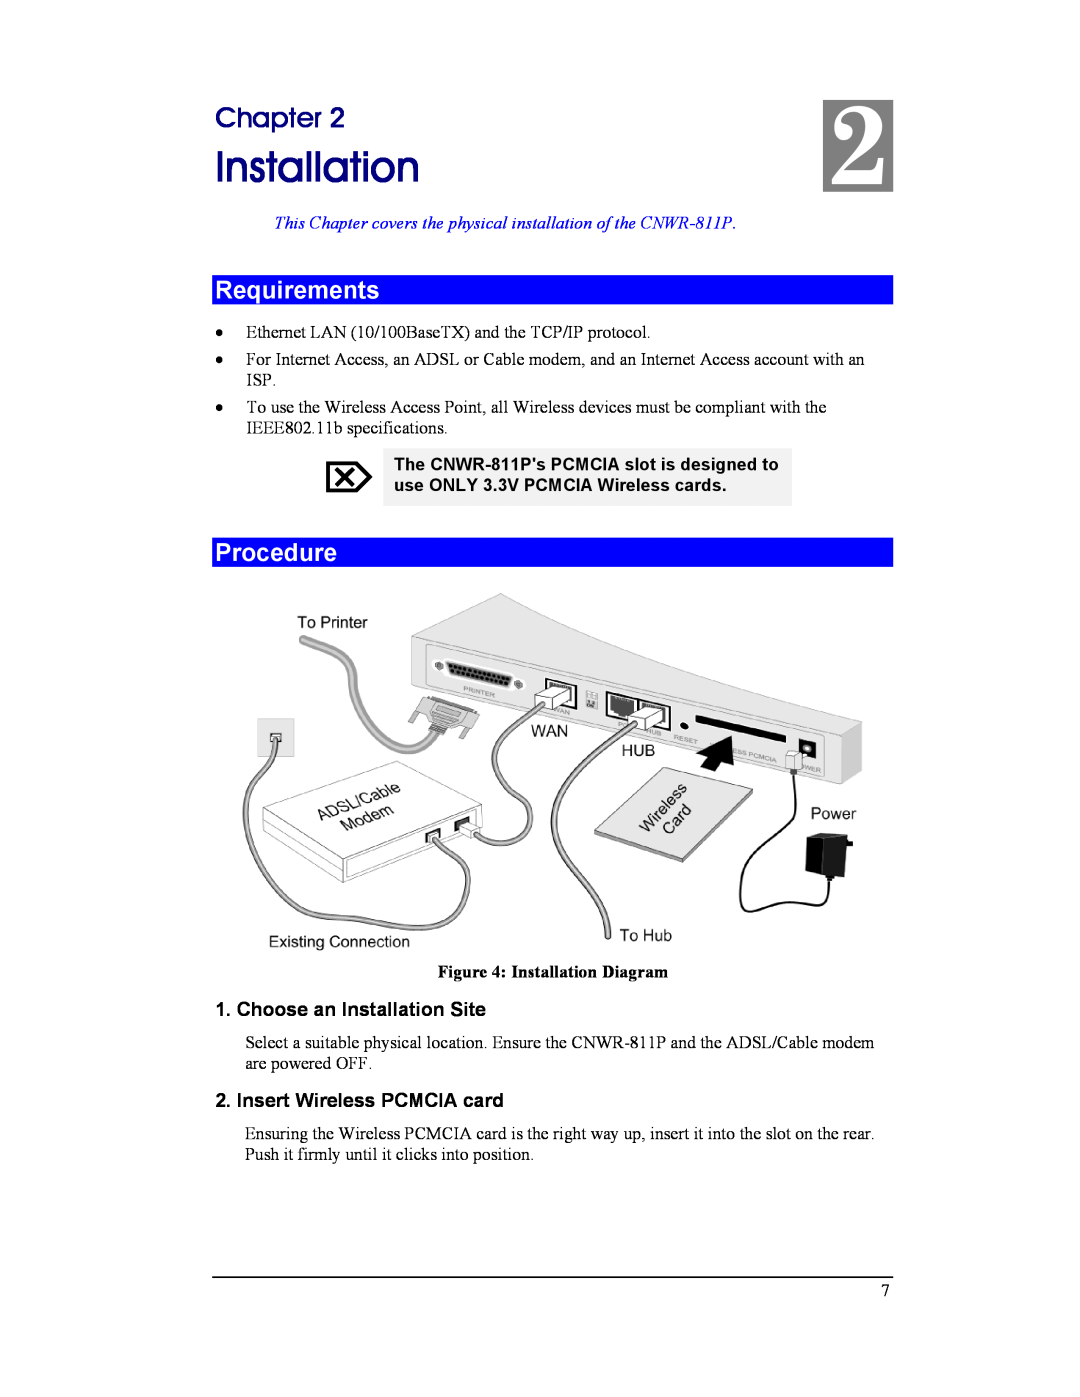 CNET CNWR-811P manual Requirements, Procedure, Choose an Installation Site, Insert Wireless PCMCIA card, Chapter 